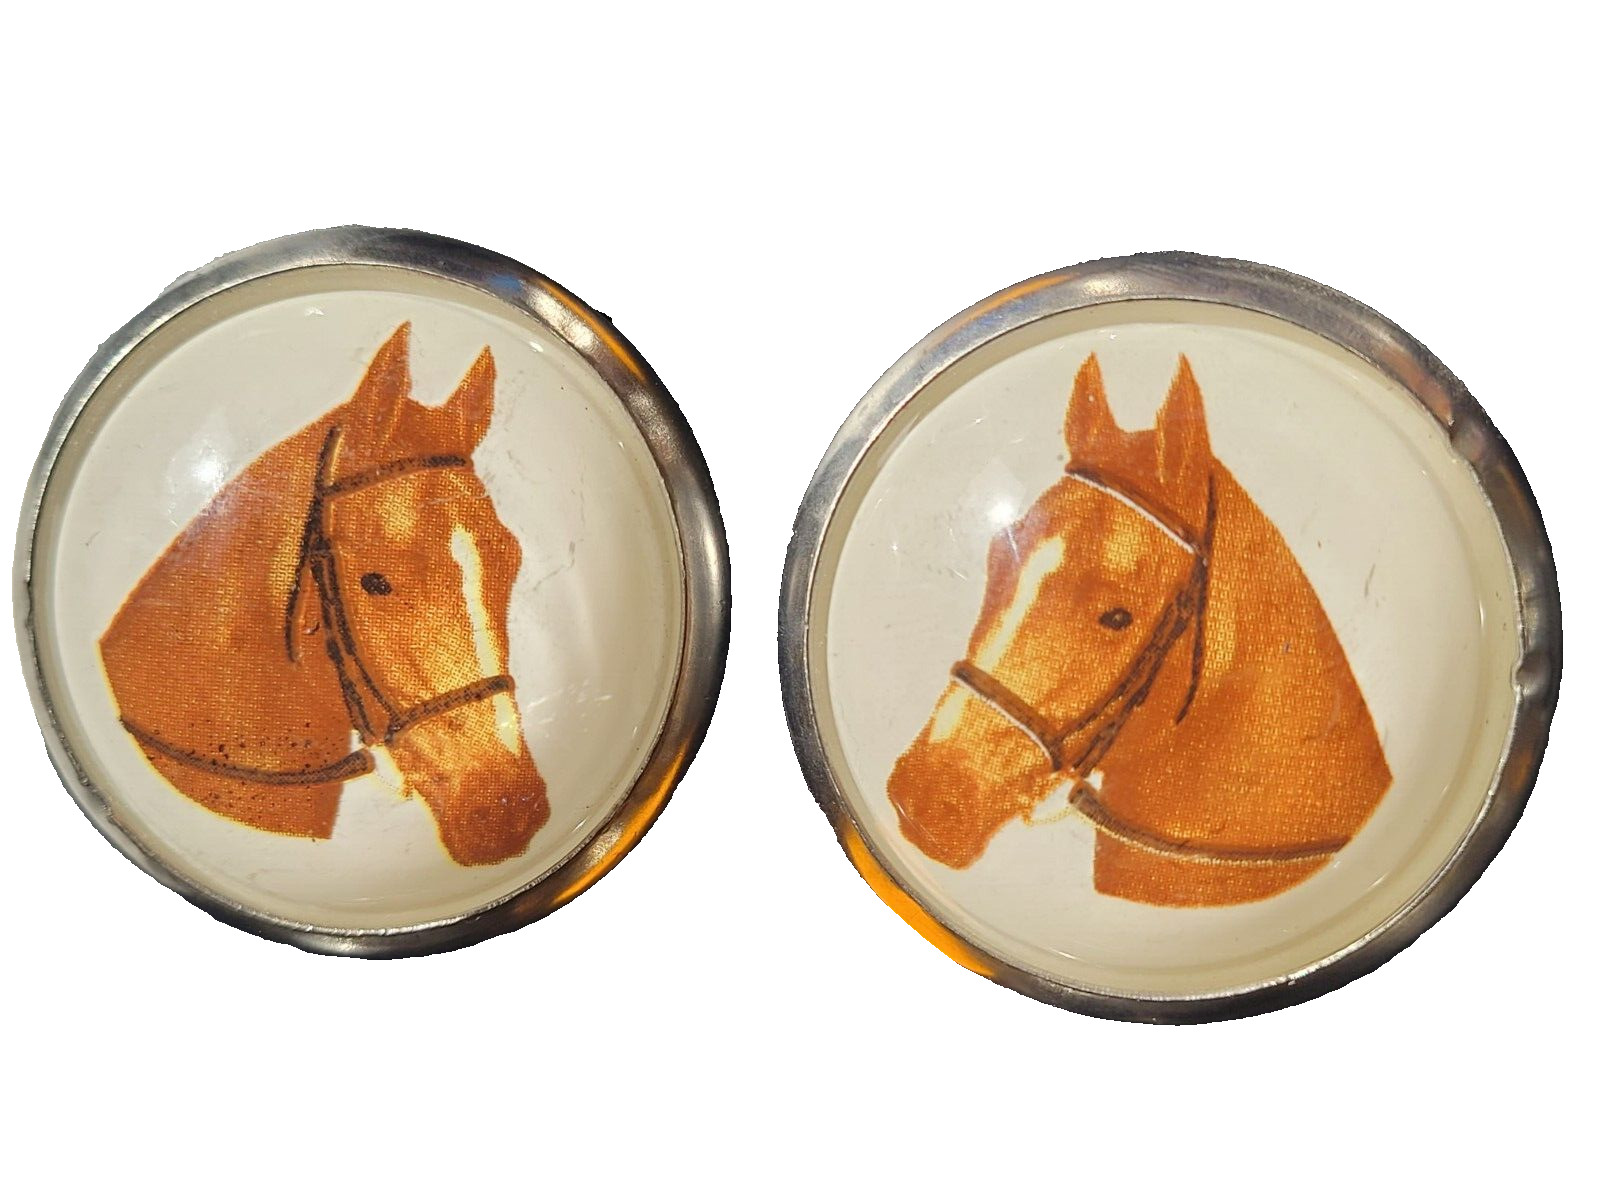 Pair [2] of Horses Bridal Rosettes Buttons Featuring Horse Heads